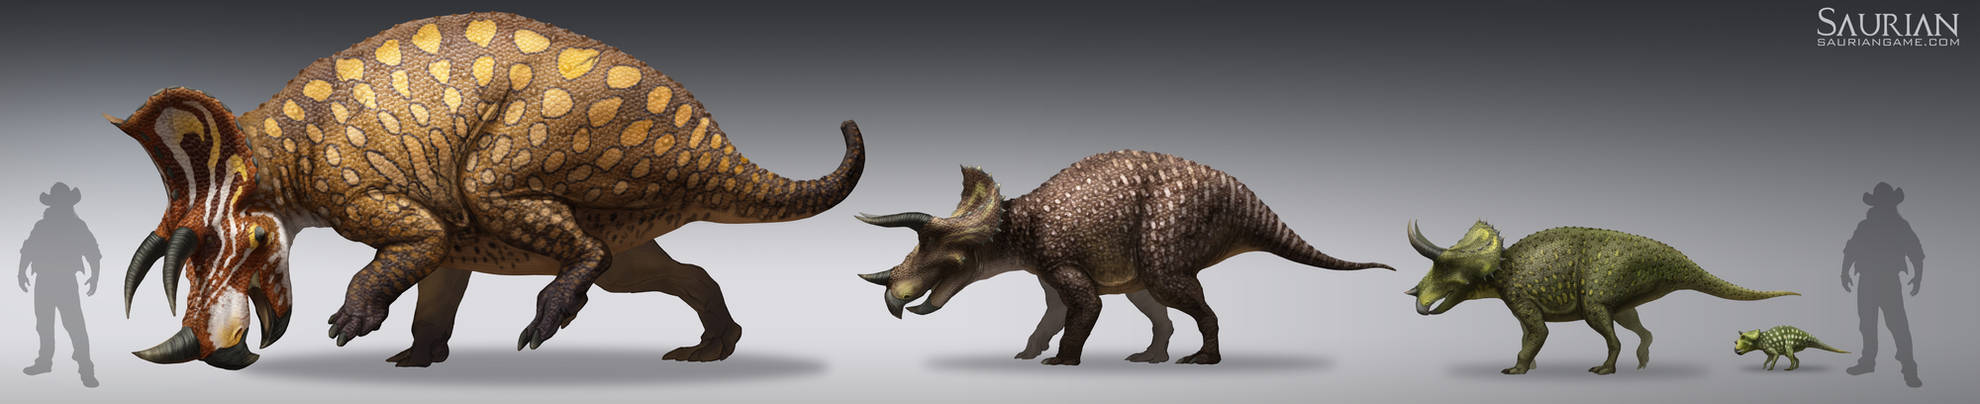 Saurian-Triceratops Lifecycle